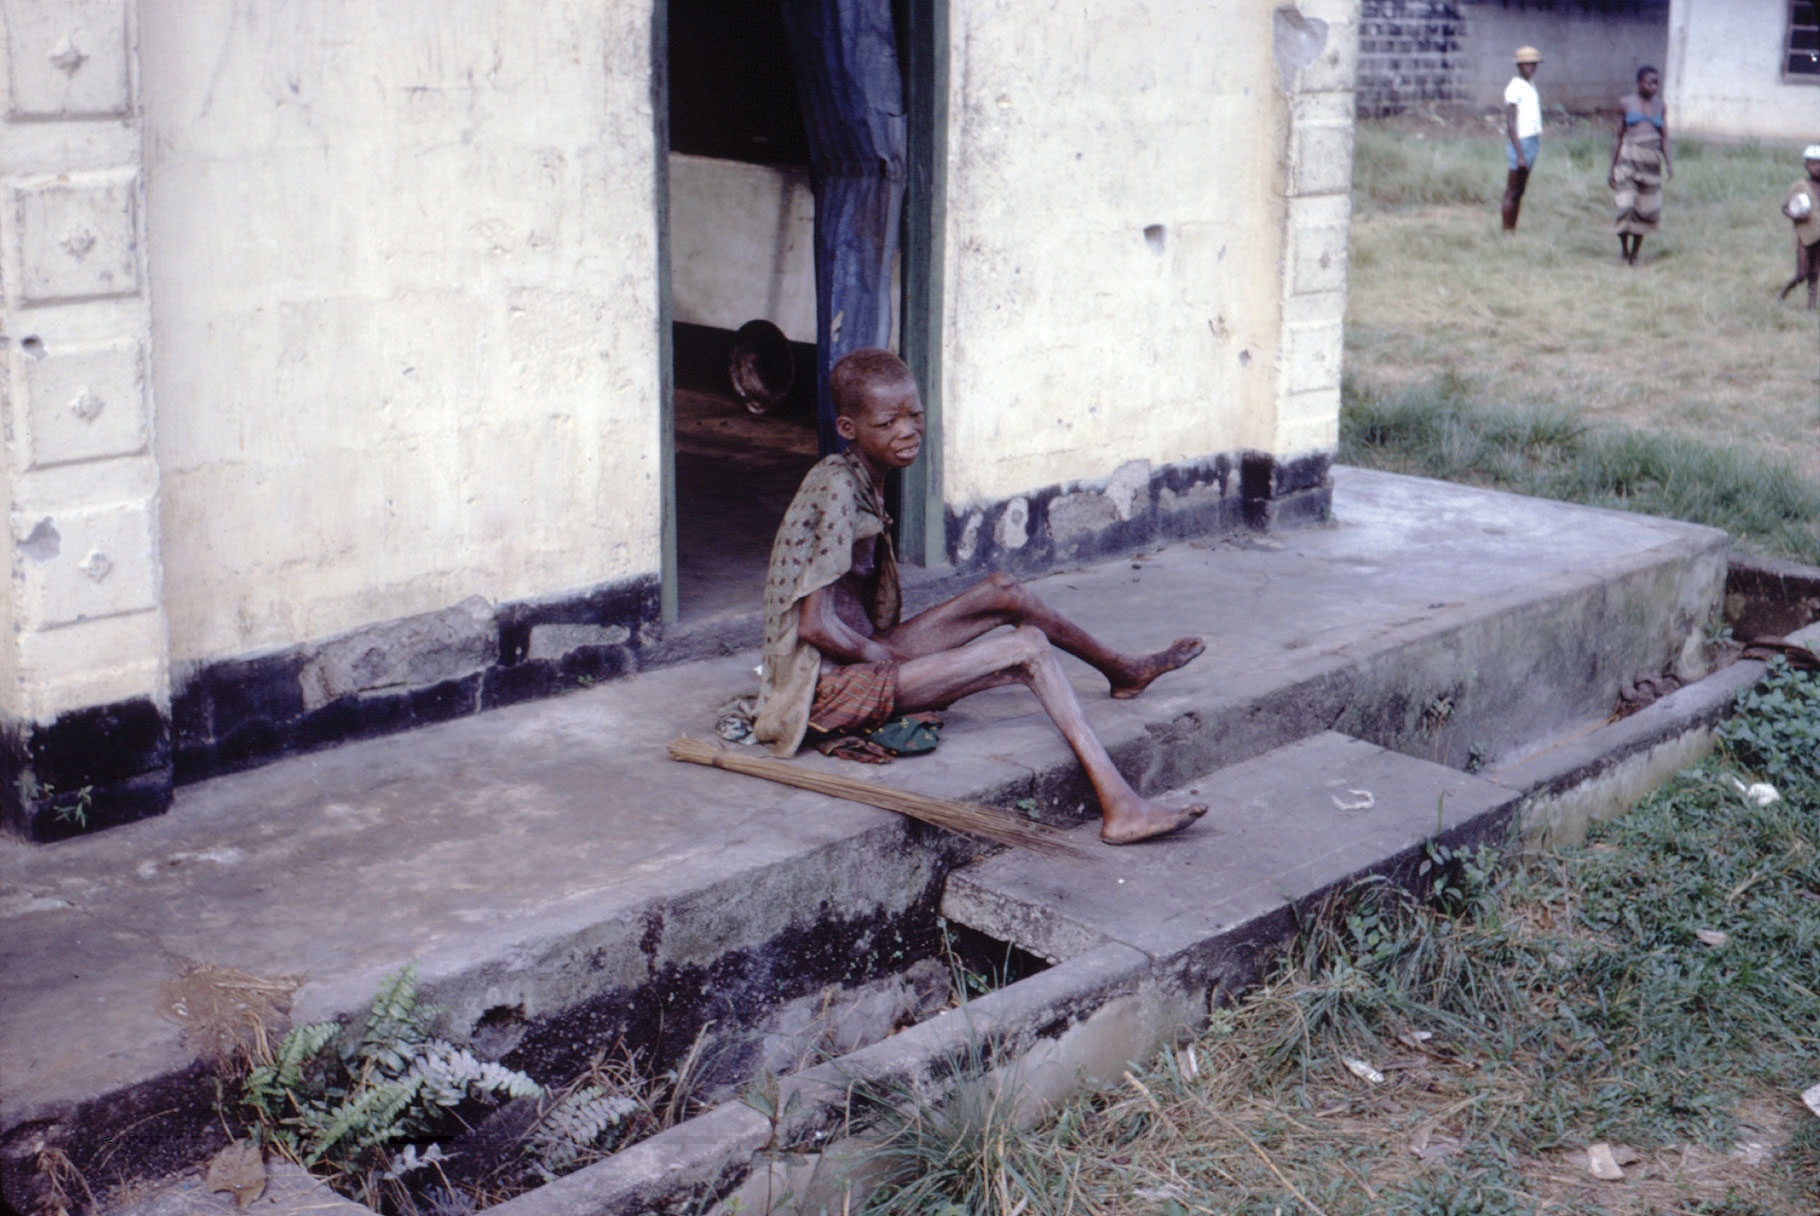 A very malnutritioned child sitting on a sidewalk. Bones are clearly visible under the skin.